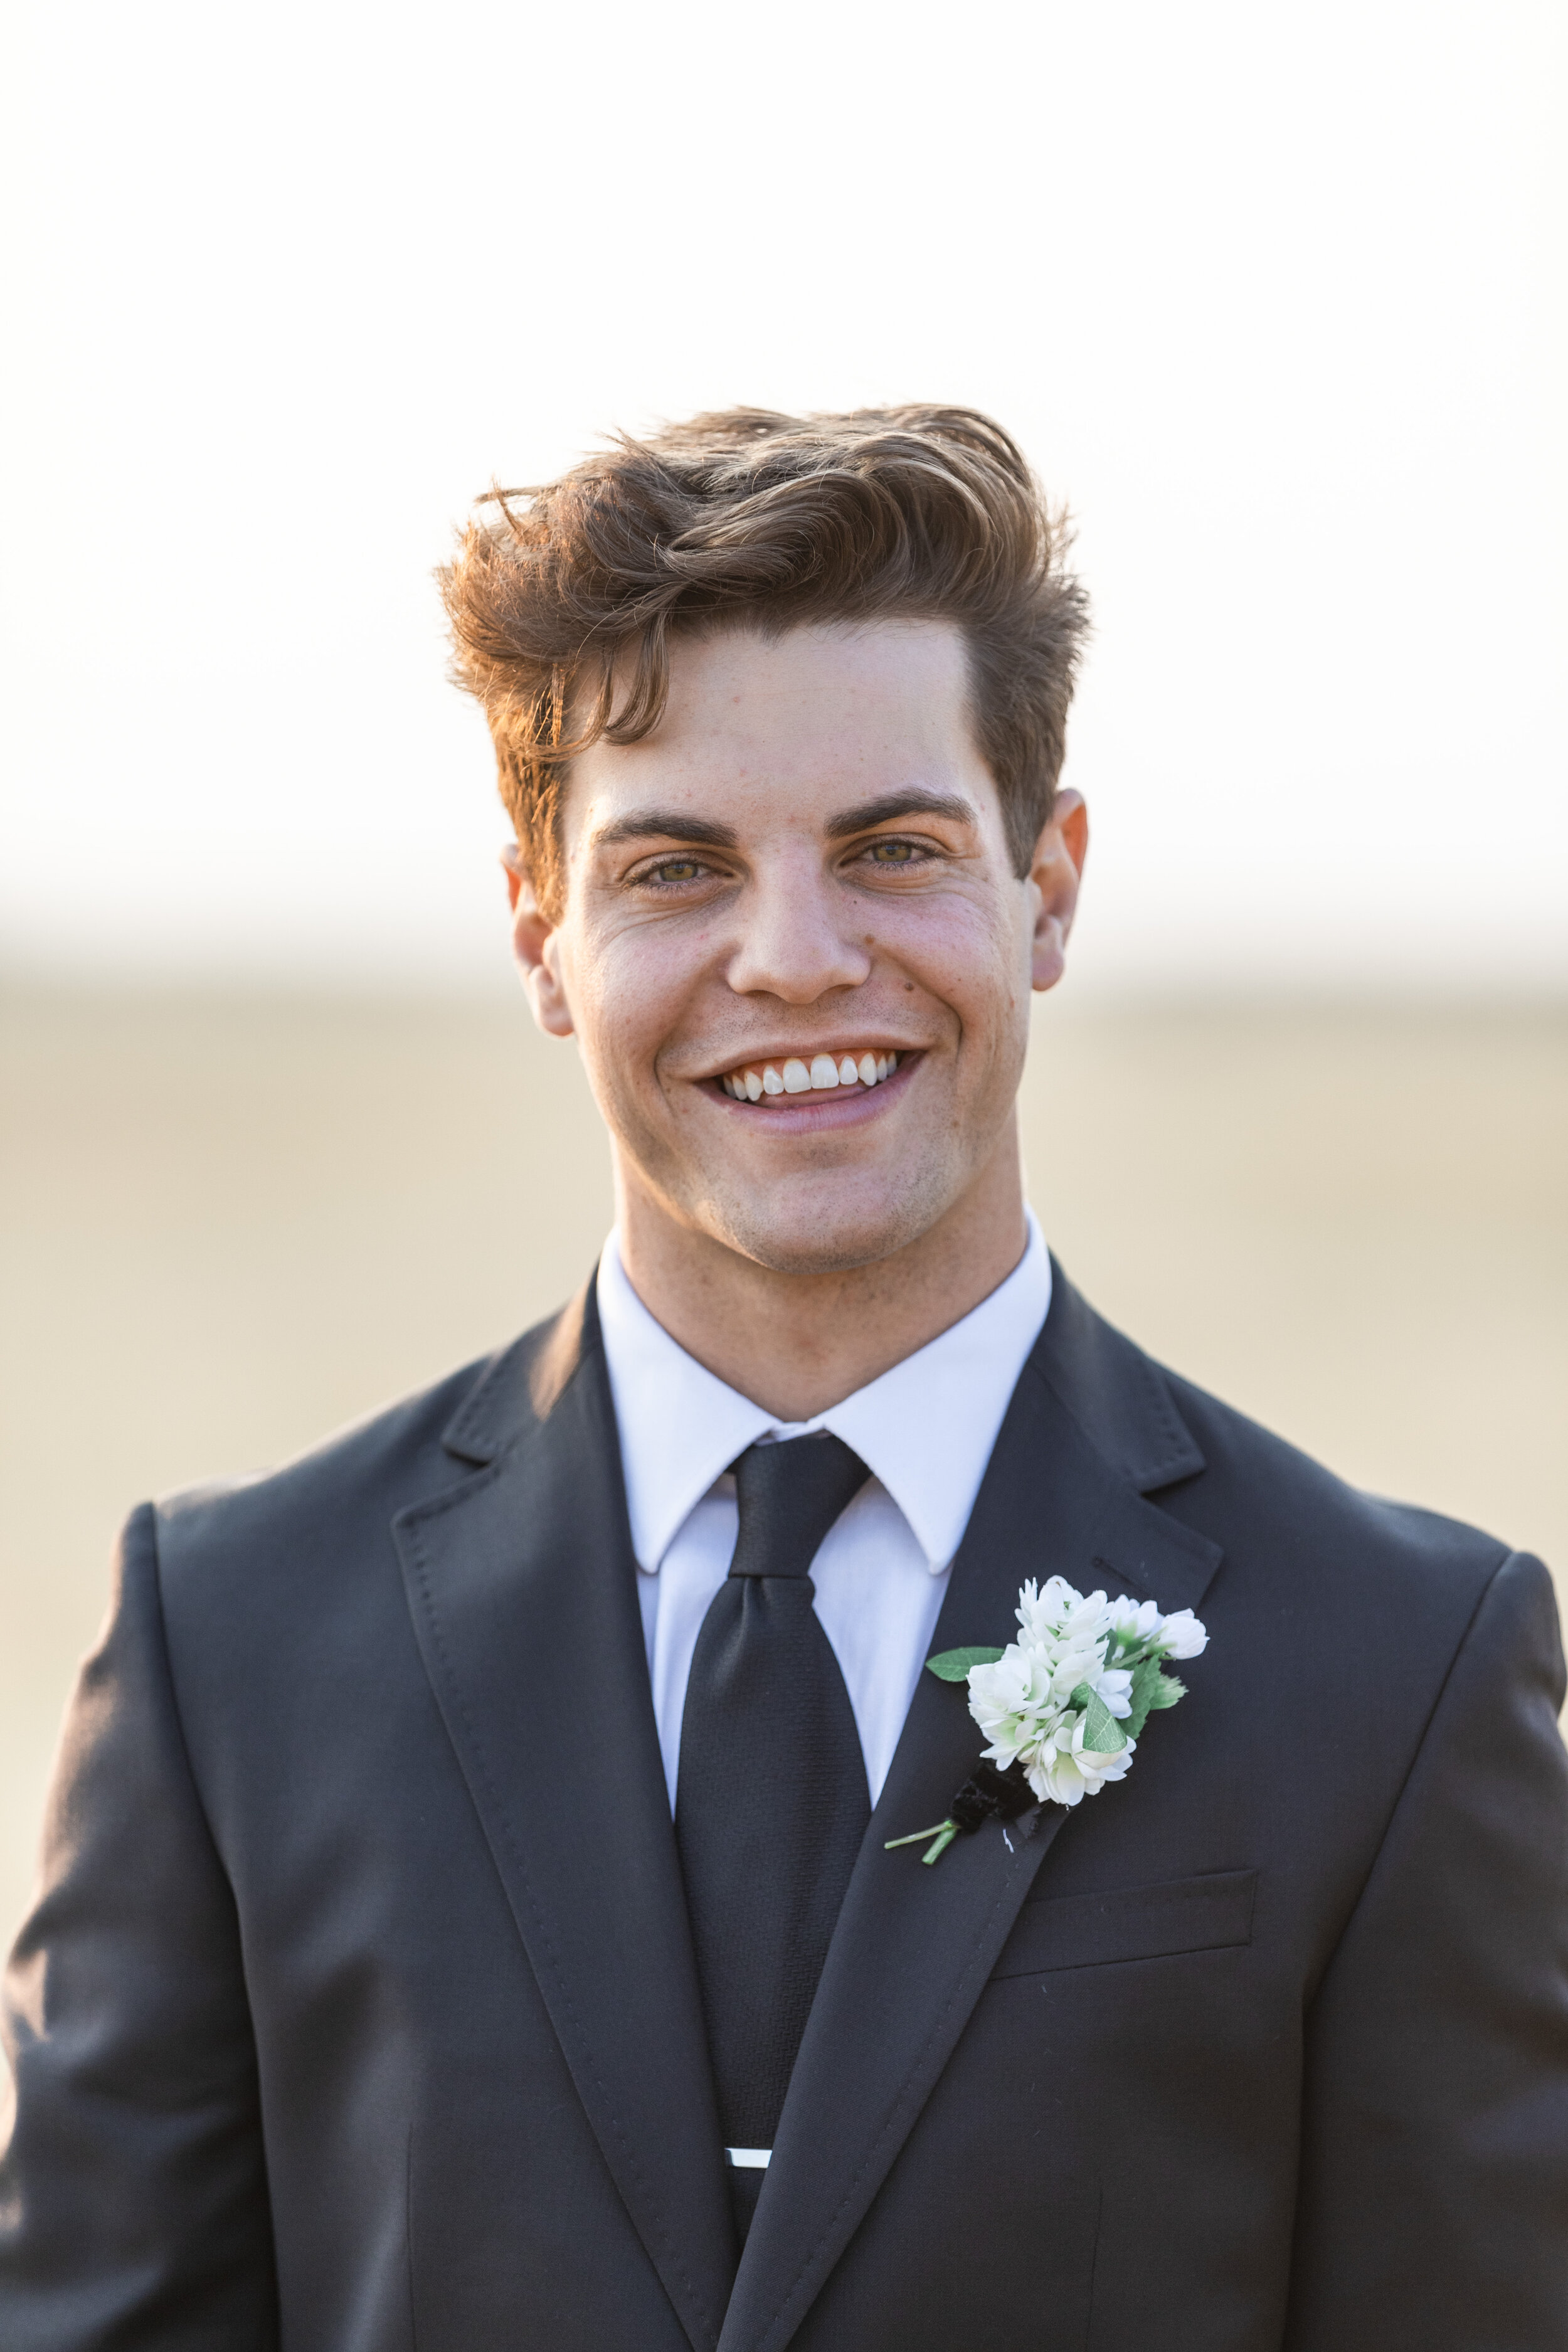  During sunset at Tunnel Springs, Savanna Richardson Photography captures golden sunlight behind the smiling groom wearing a white floral boutonniere. handsome groom groom goals groom in black suit classic wedding colors #savannarichardsonphotography